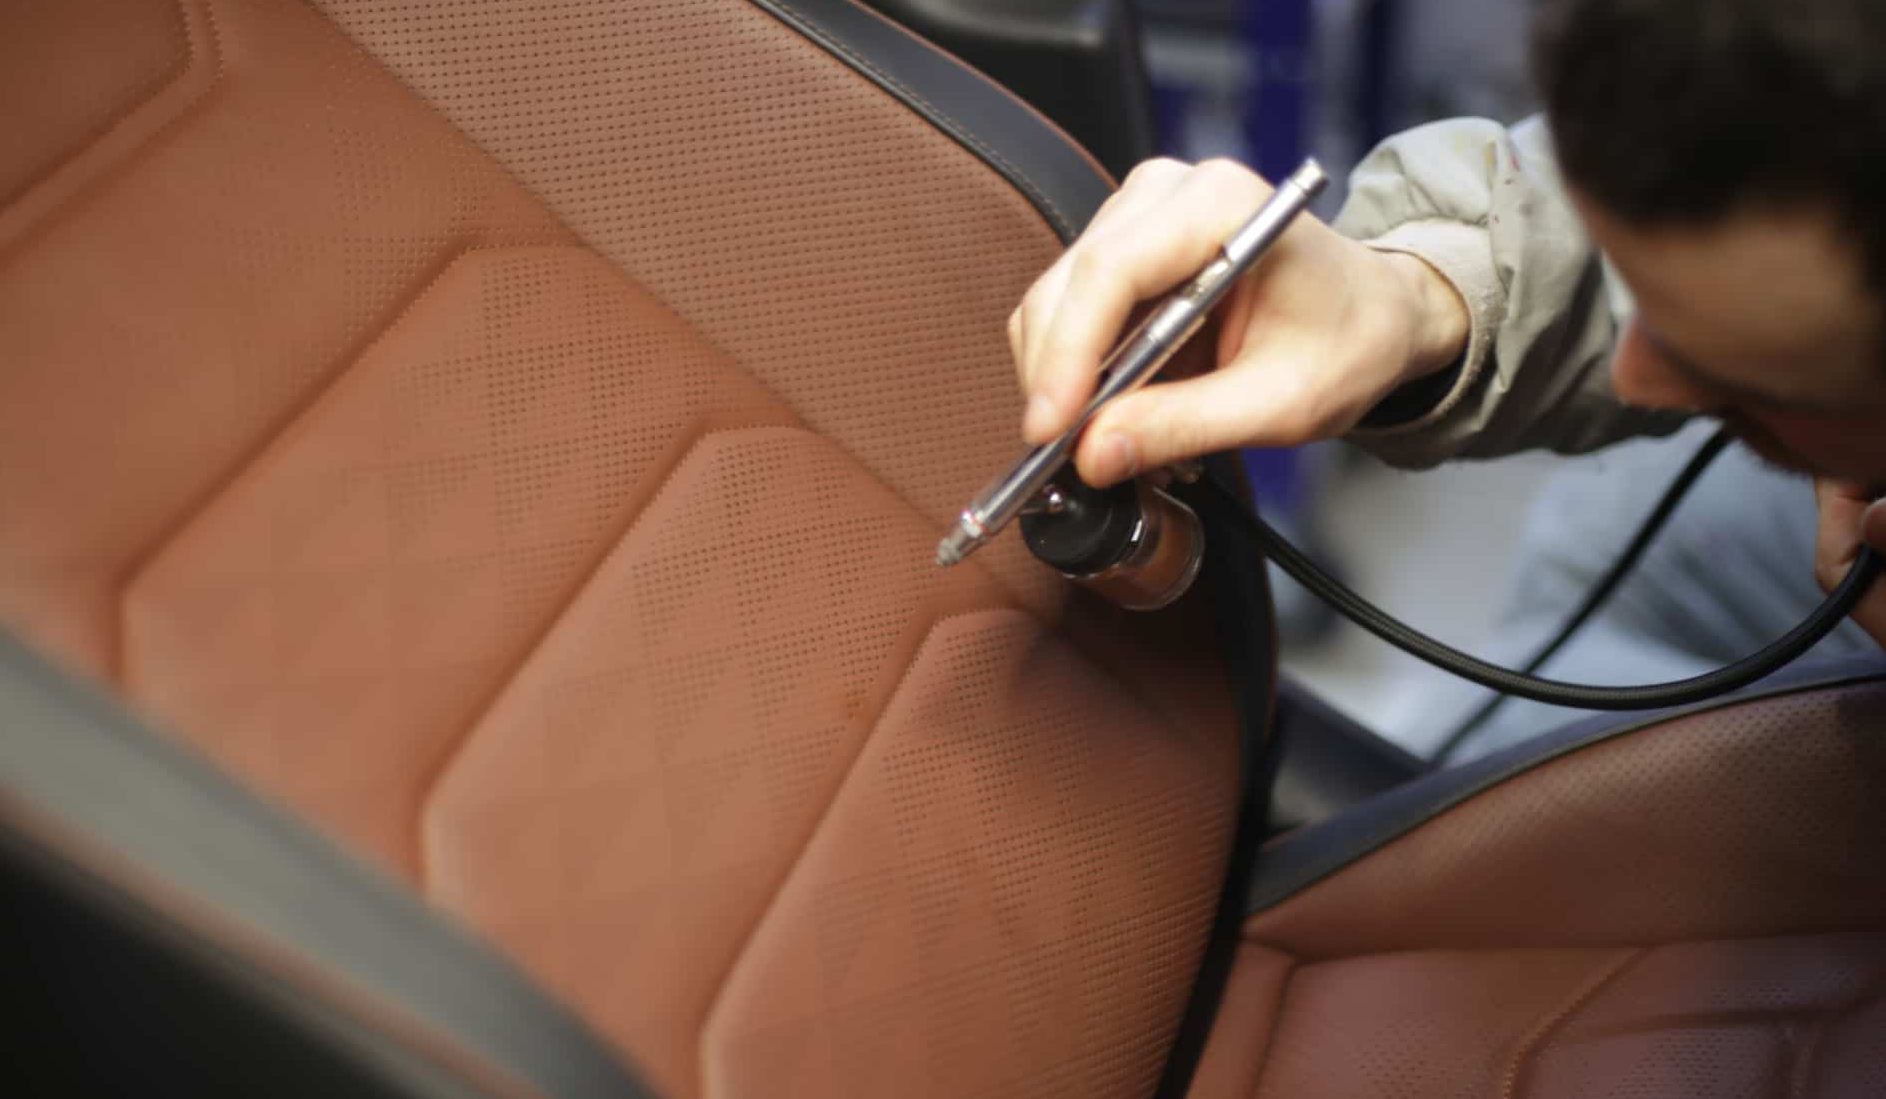 buy and The price of all kinds of painting leather seats - Arad Branding